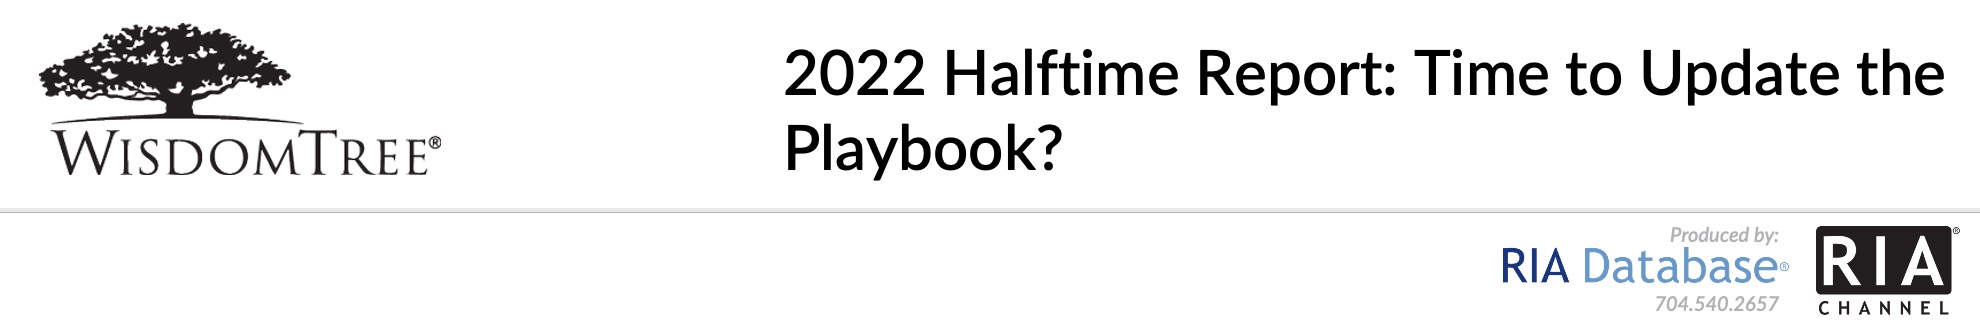 2022 Halftime Report: Time to Update the Playbook?